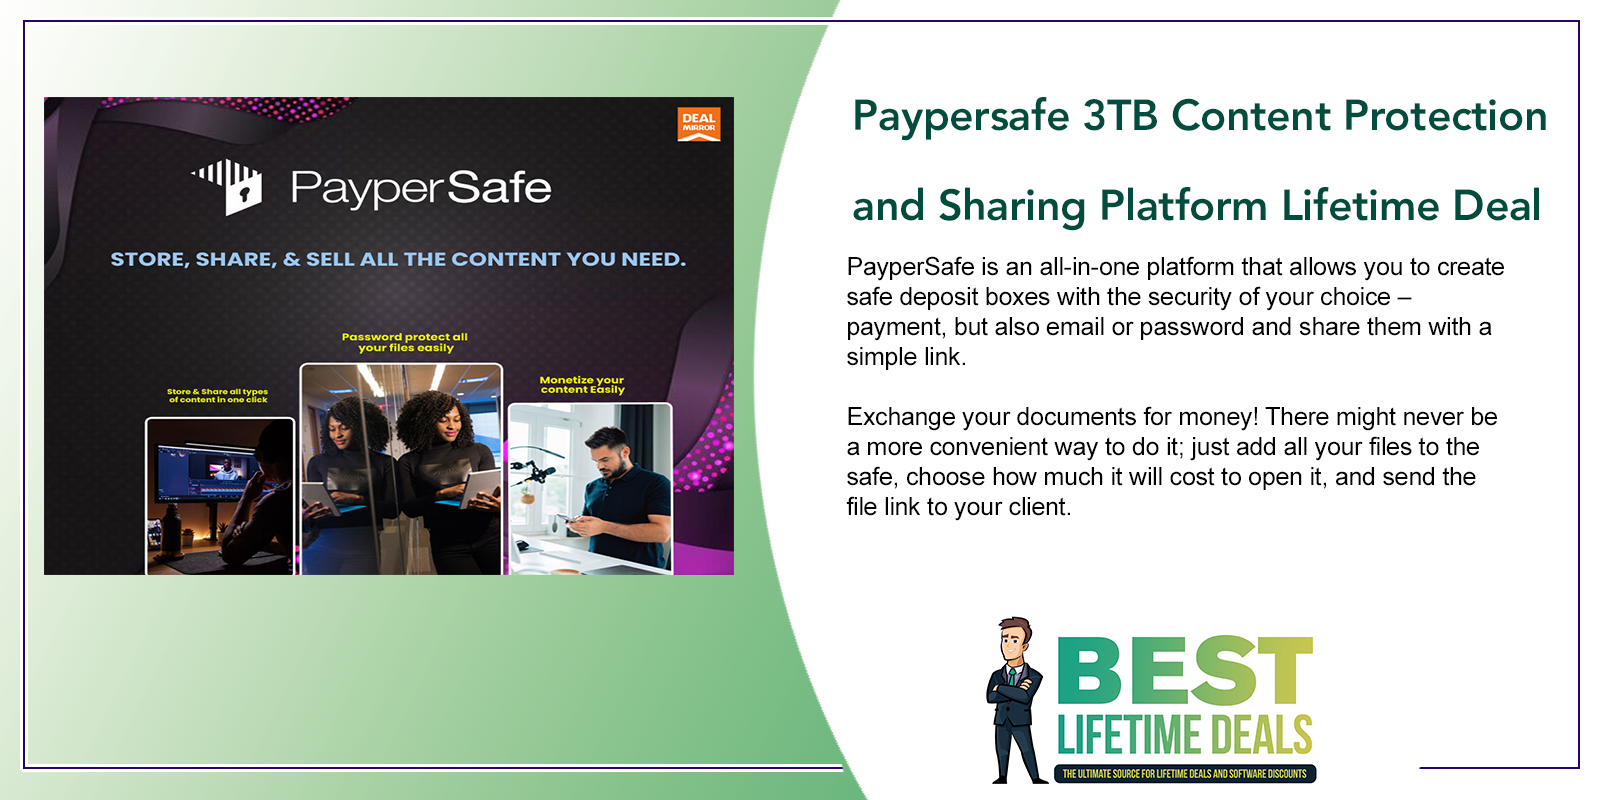 Paypersafe 3TB Content Protection and Sharing Platform Lifetime Deal Featured Image